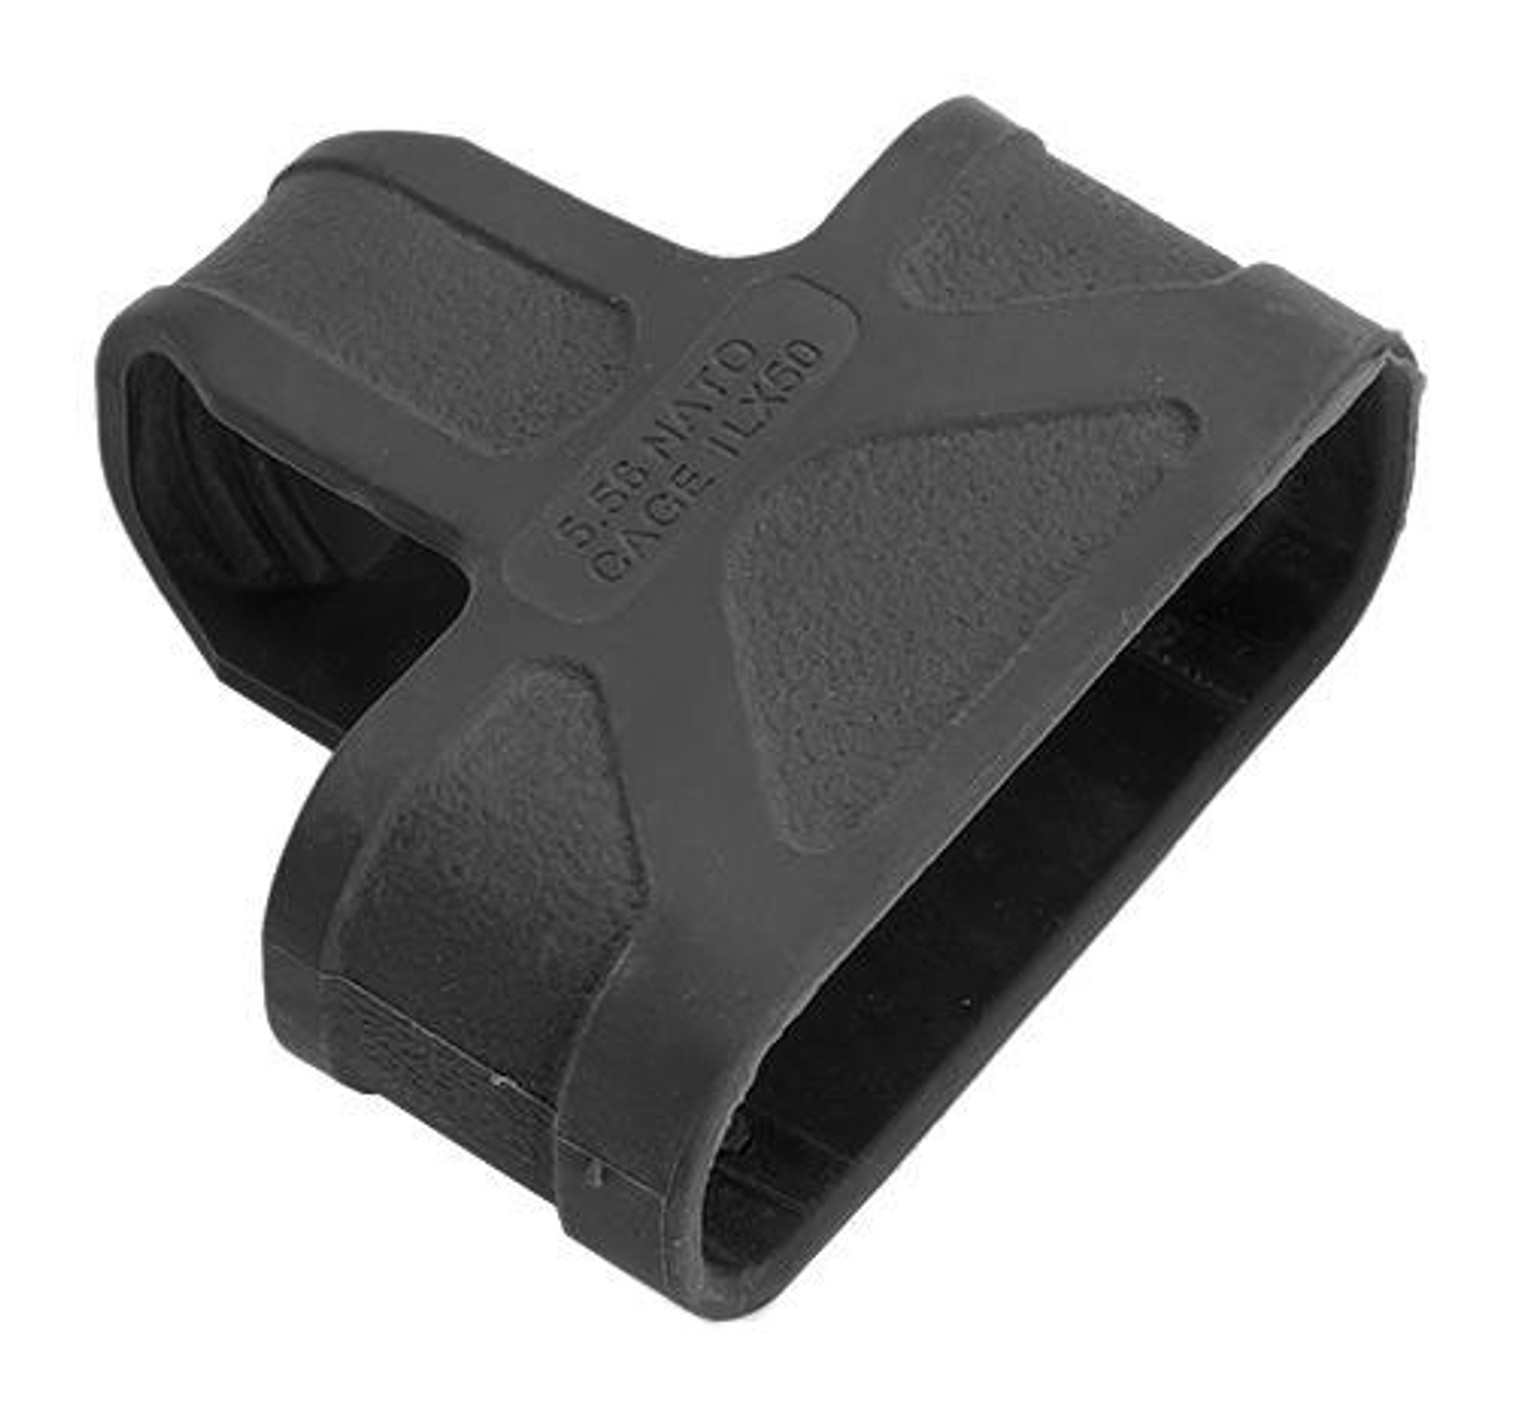 MAGPUL Magazine Assist for 5.56 Magazines (Color: Black / Set of One)